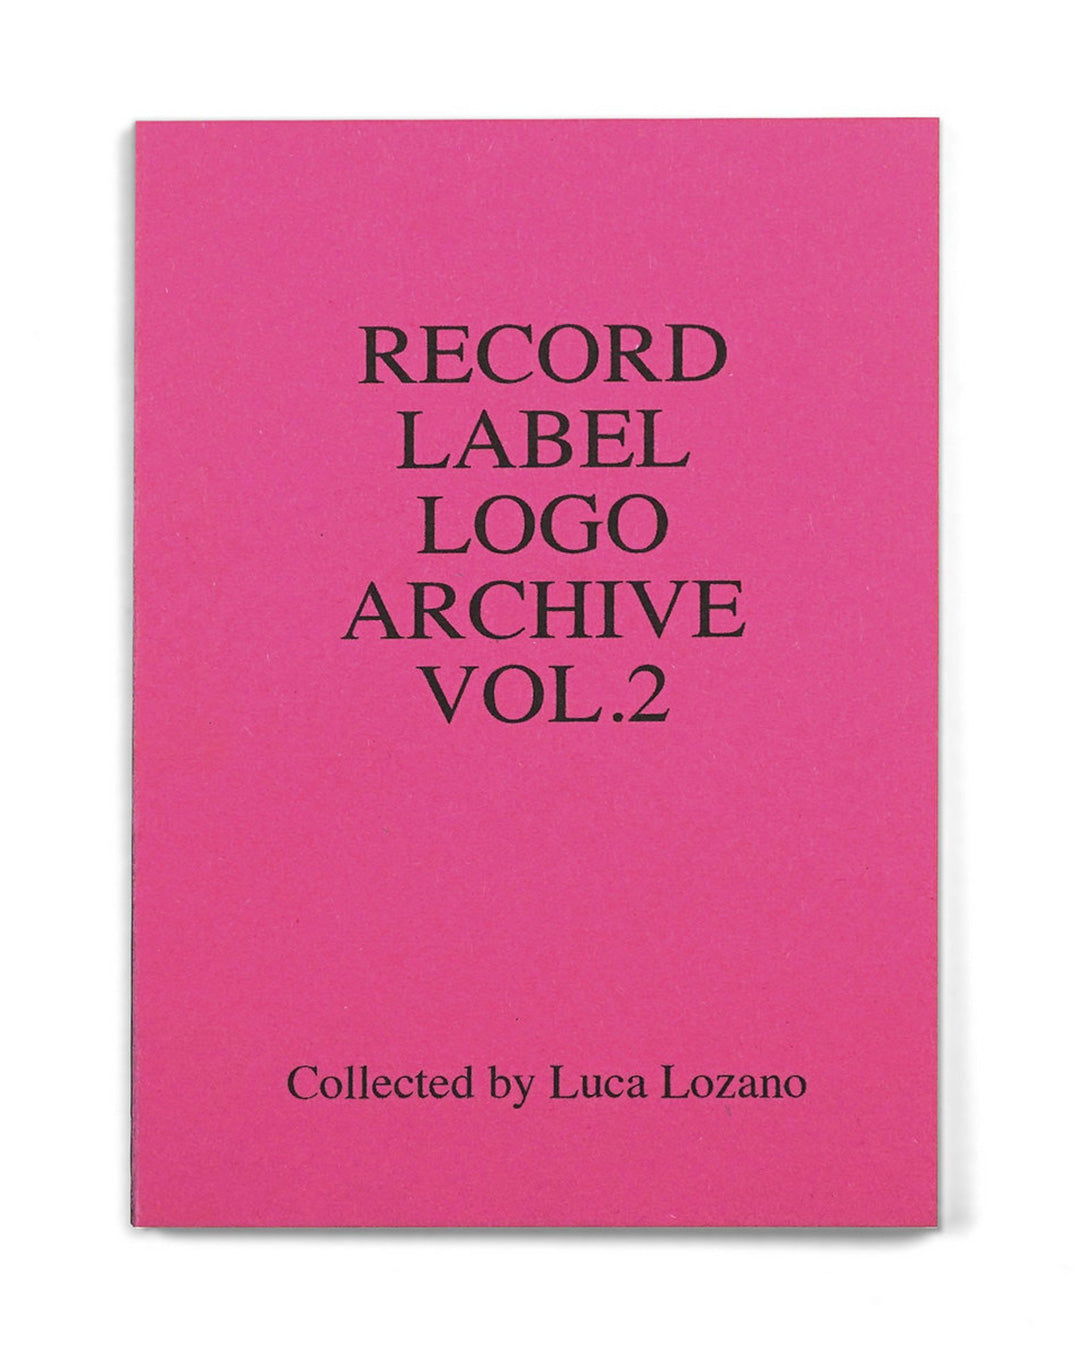 KFAX7 - RECORD LABEL LOGO ARCHIVE VOL.2 - Collected by Luca Lozano